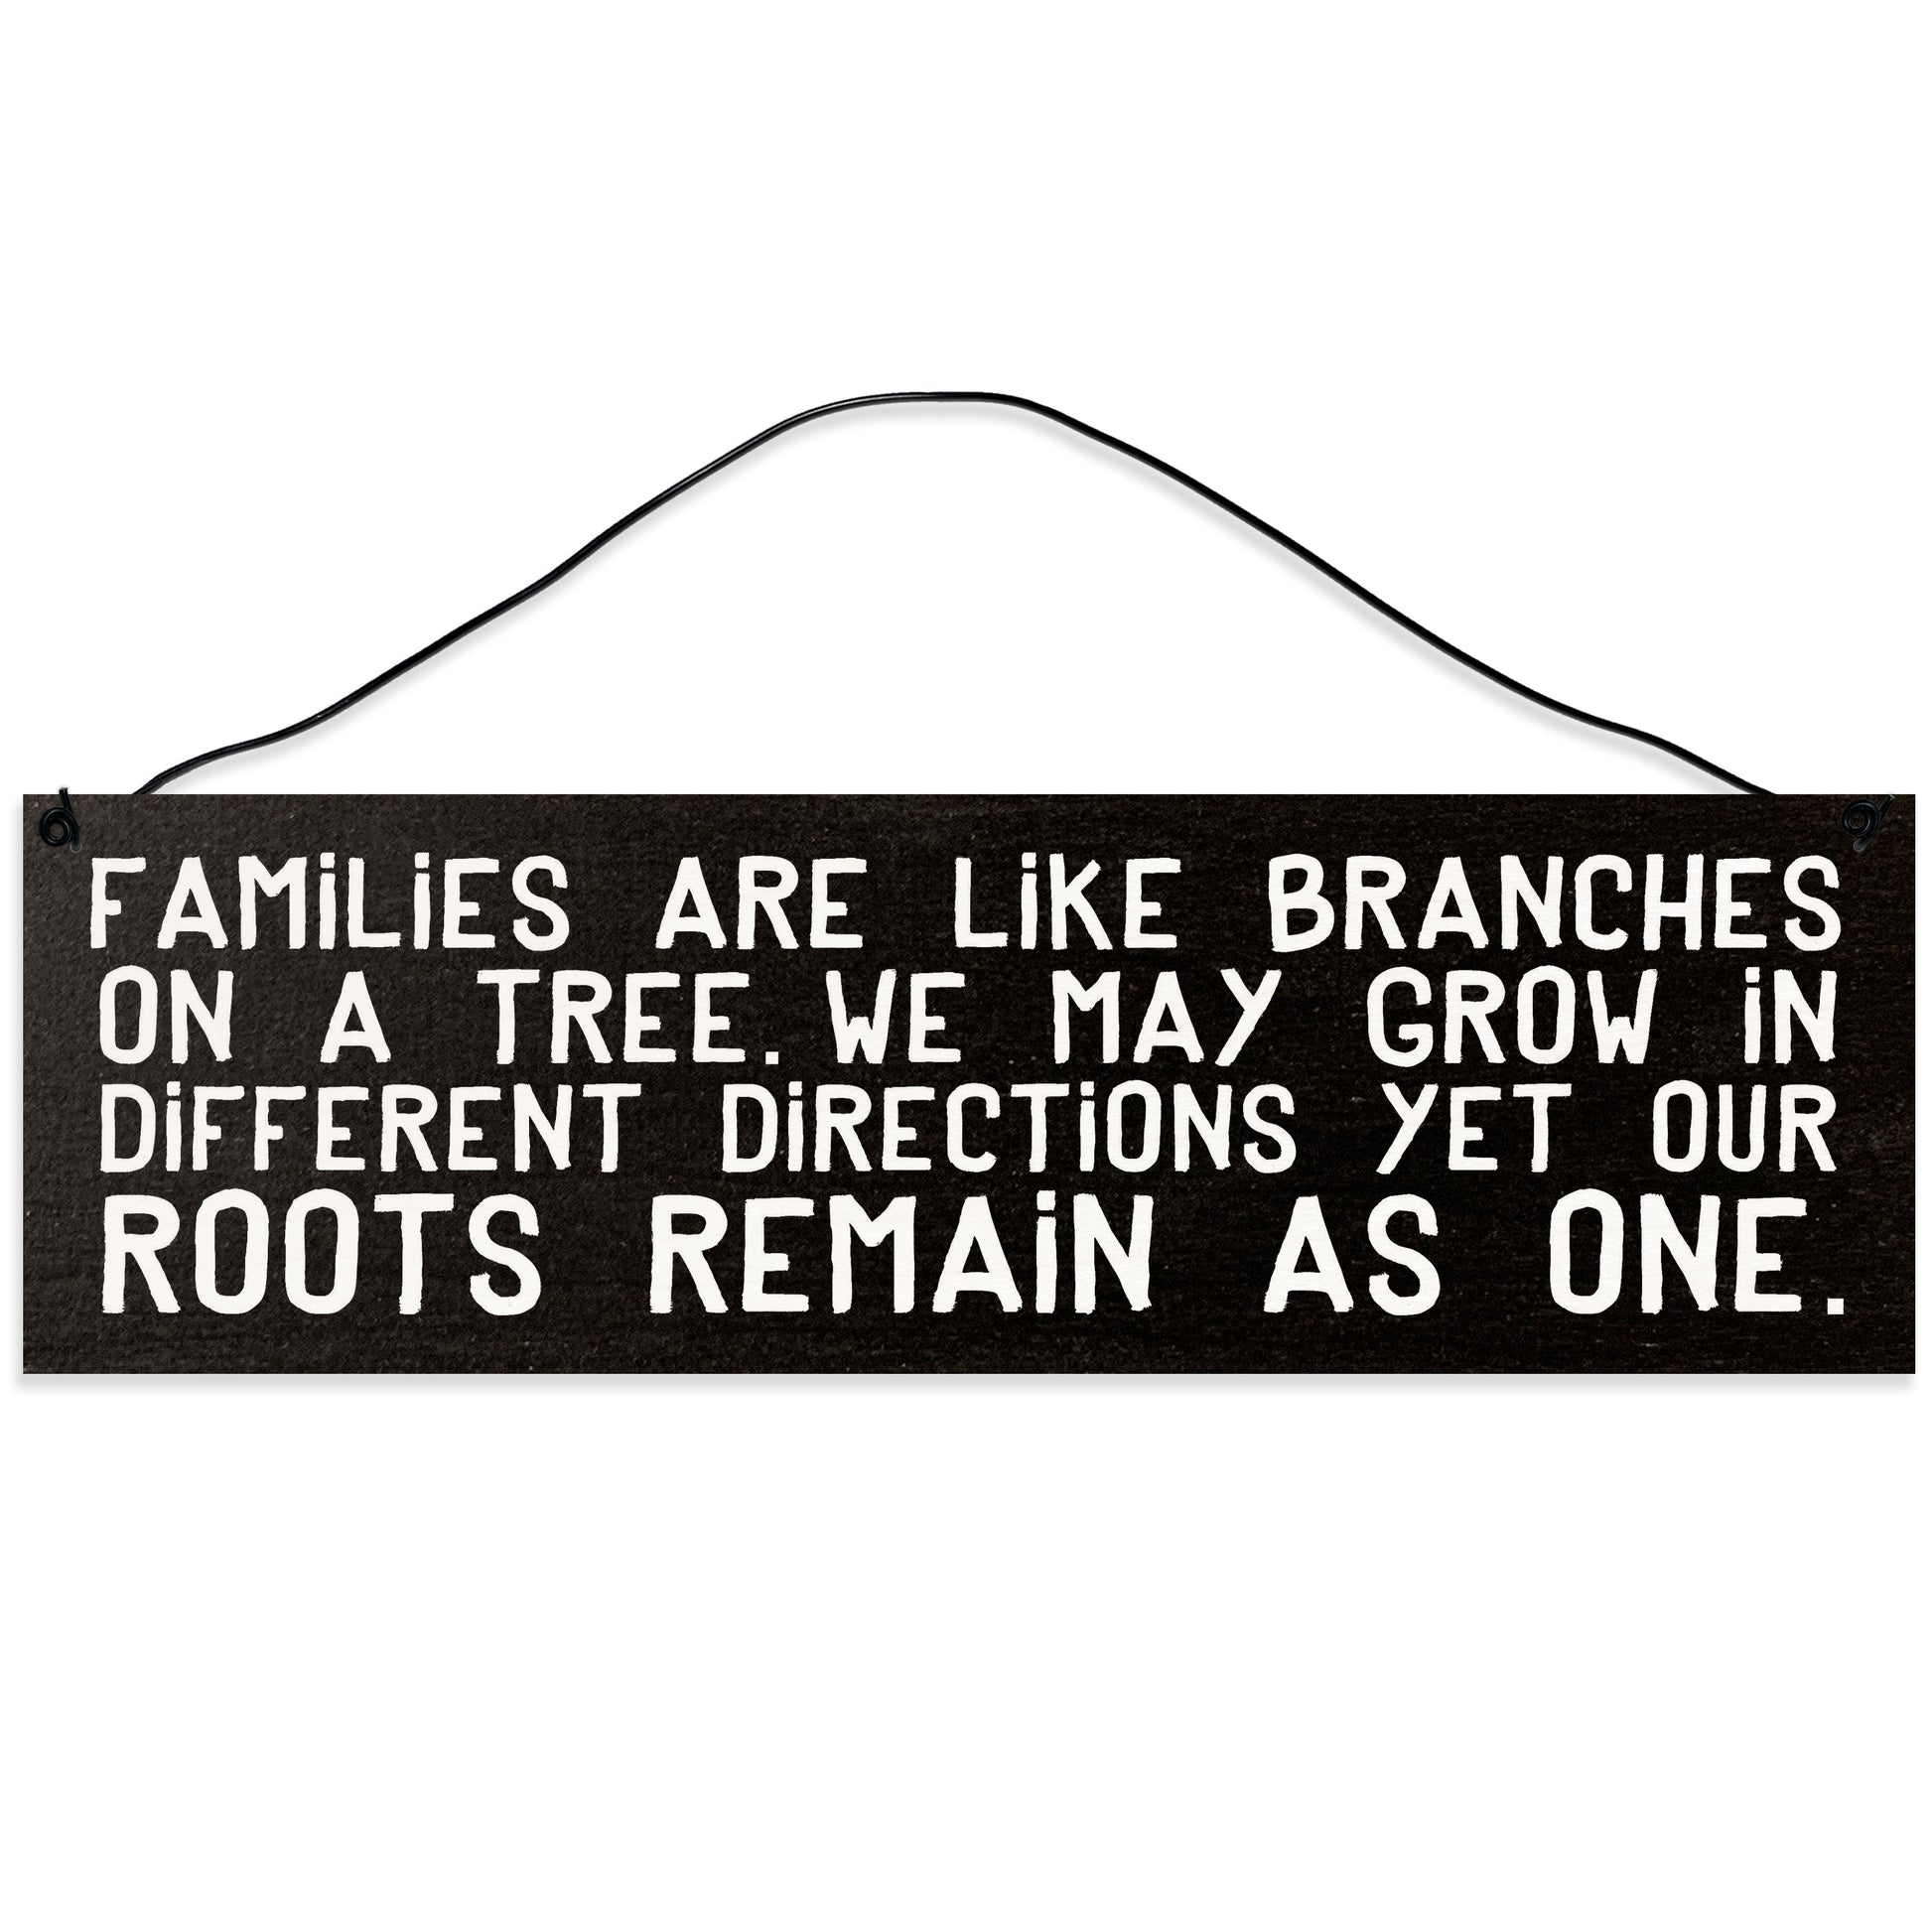 Sawyer's Mill - Families are Like Branches on a Tree. Wood Sign for Home or Office. Measures 3x10 inches.